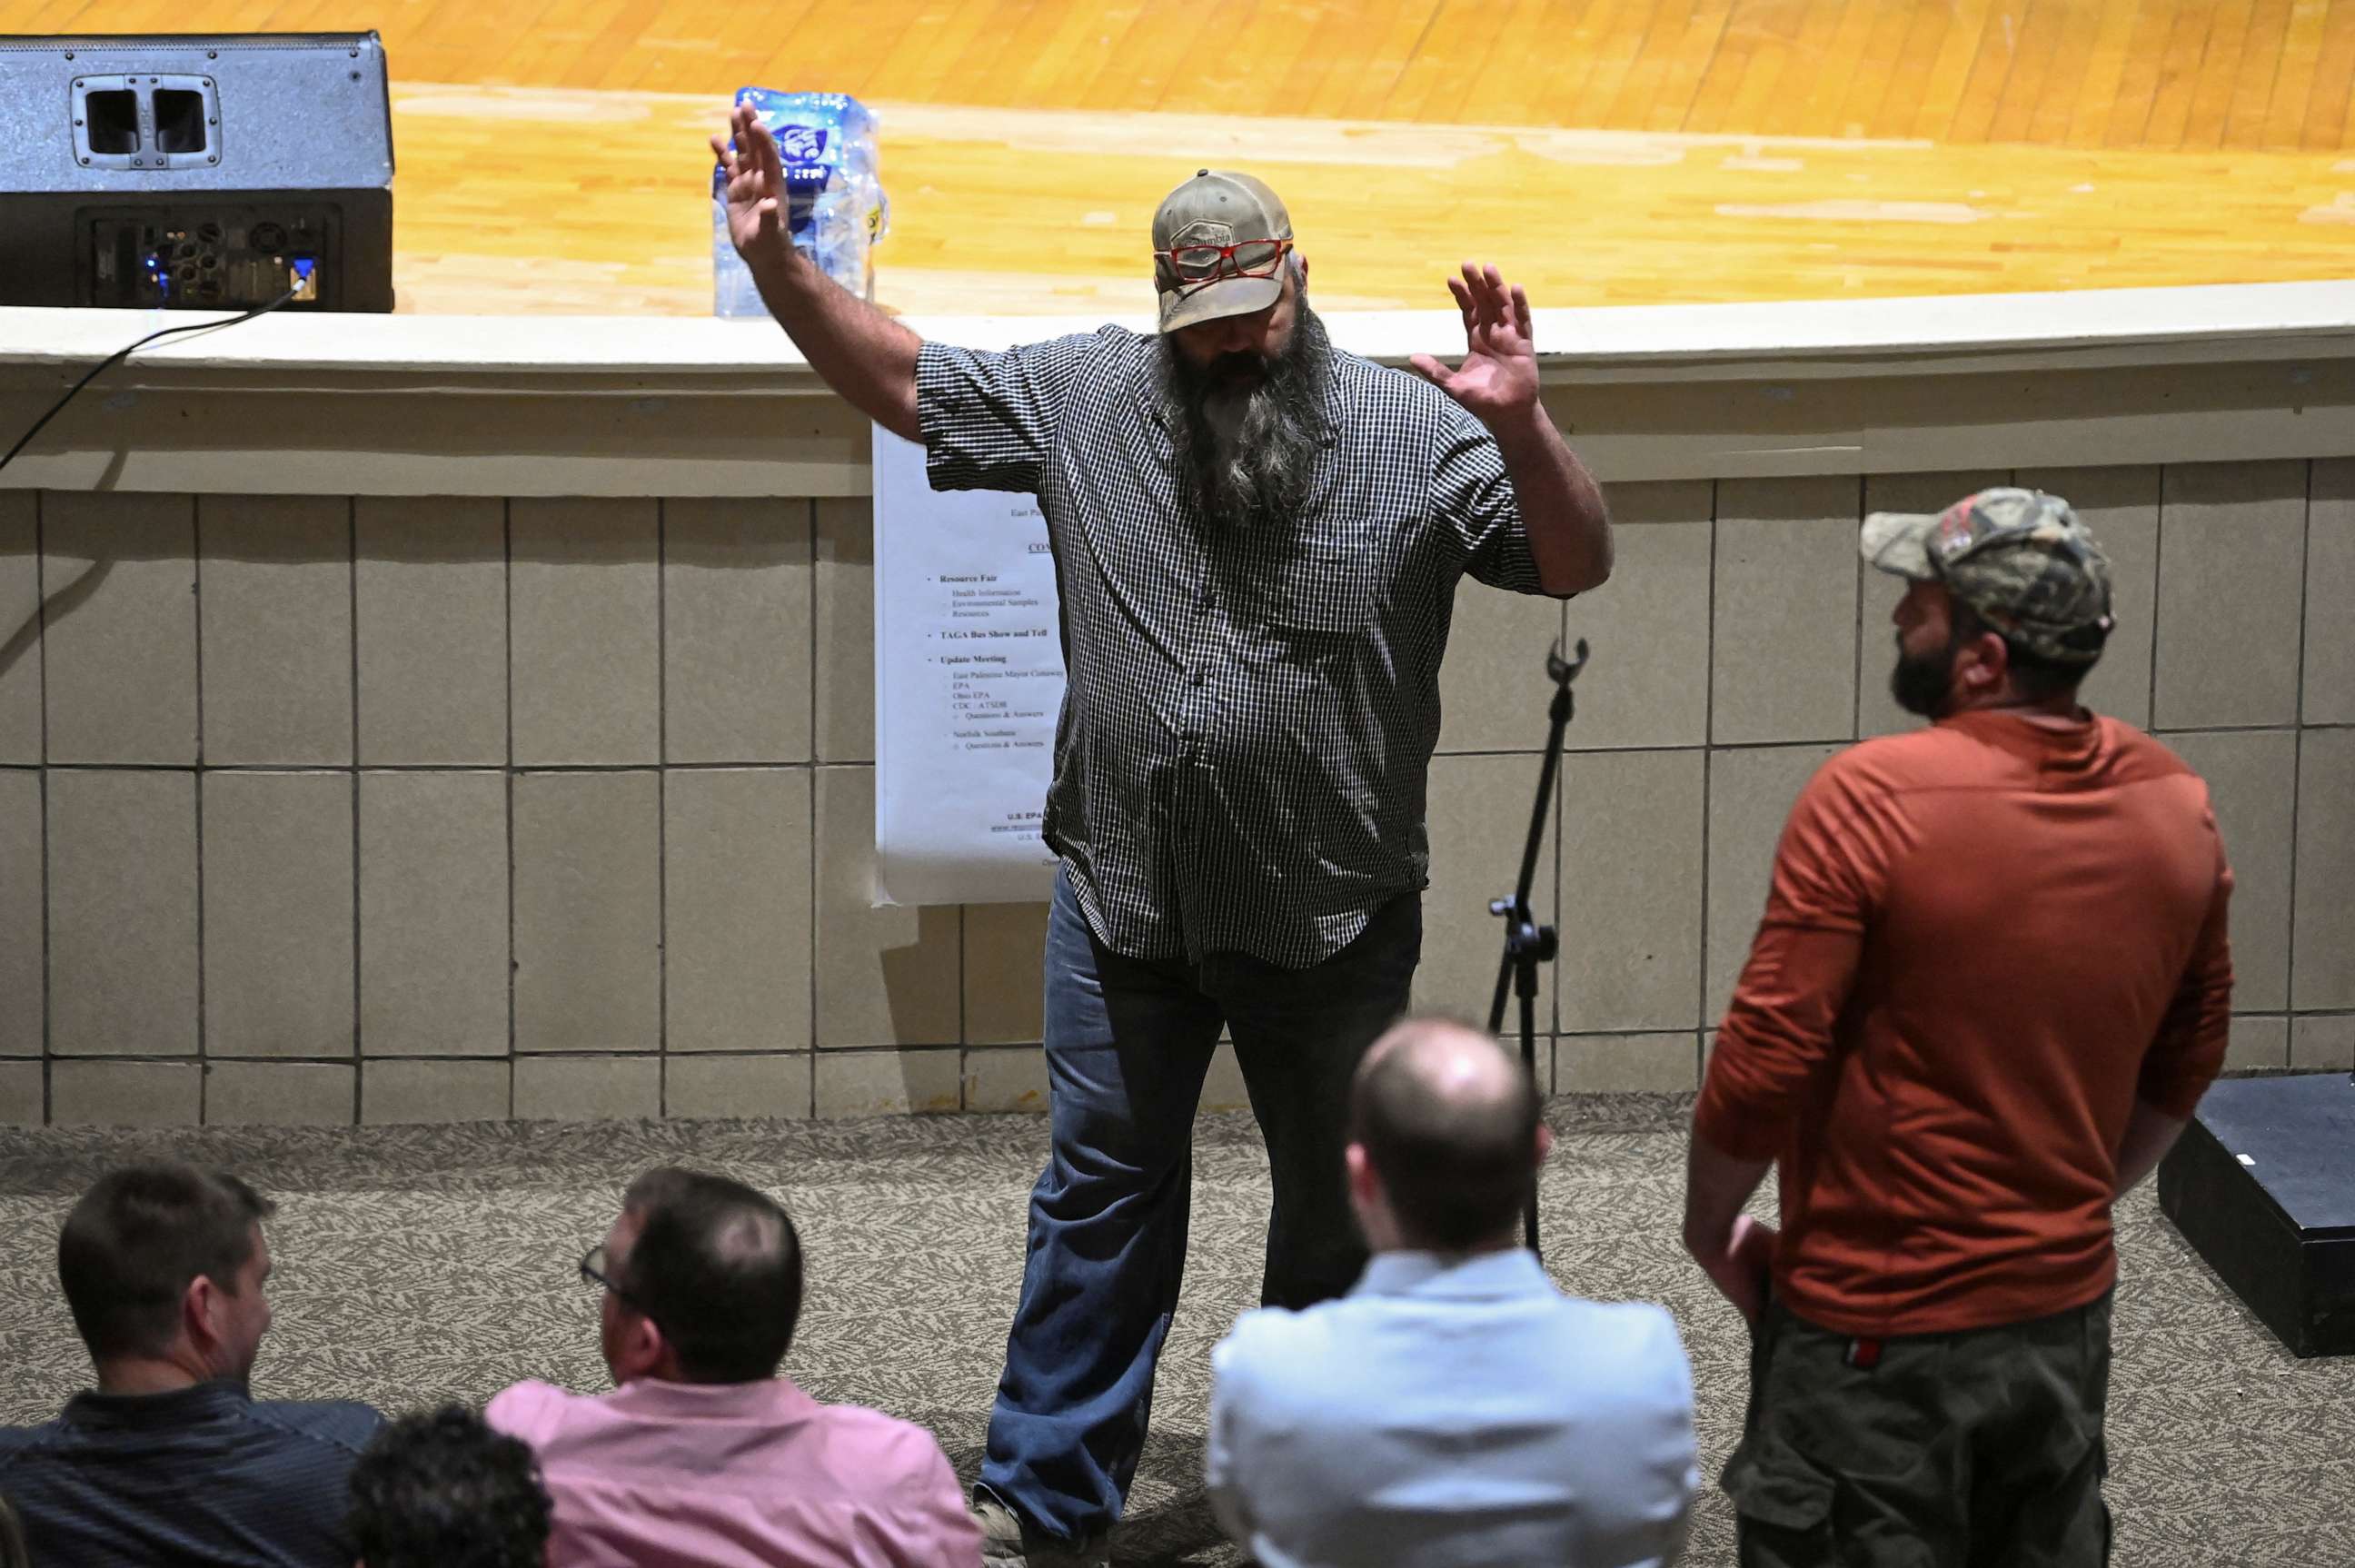 PHOTO: Residents attend a town hall to discuss the train derailment that spilled toxic chemicals, in East Palestine, Ohio, Mar. 2, 2023.